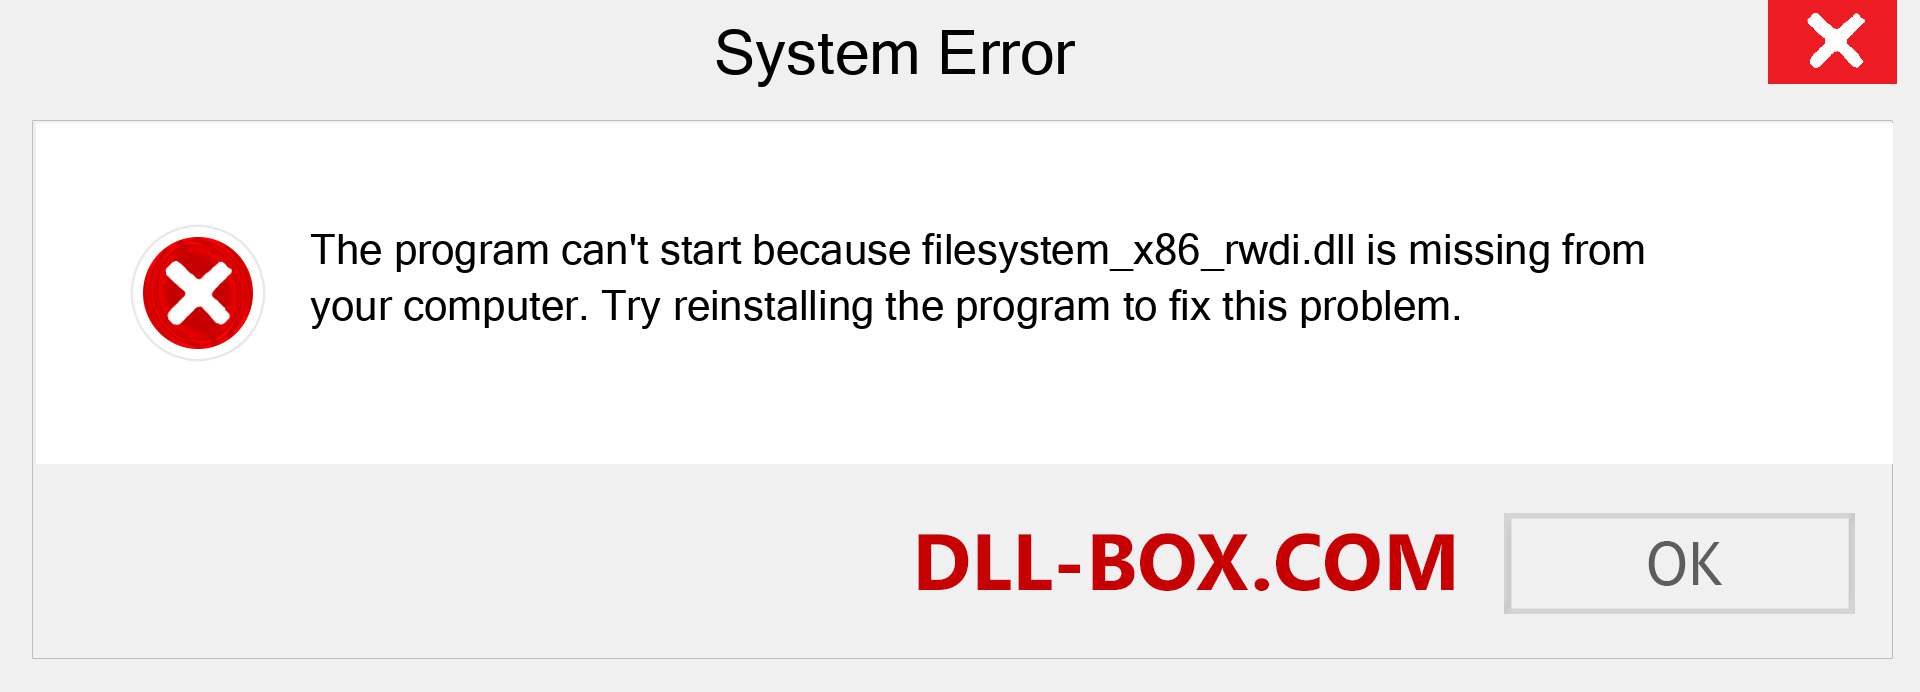  filesystem_x86_rwdi.dll file is missing?. Download for Windows 7, 8, 10 - Fix  filesystem_x86_rwdi dll Missing Error on Windows, photos, images